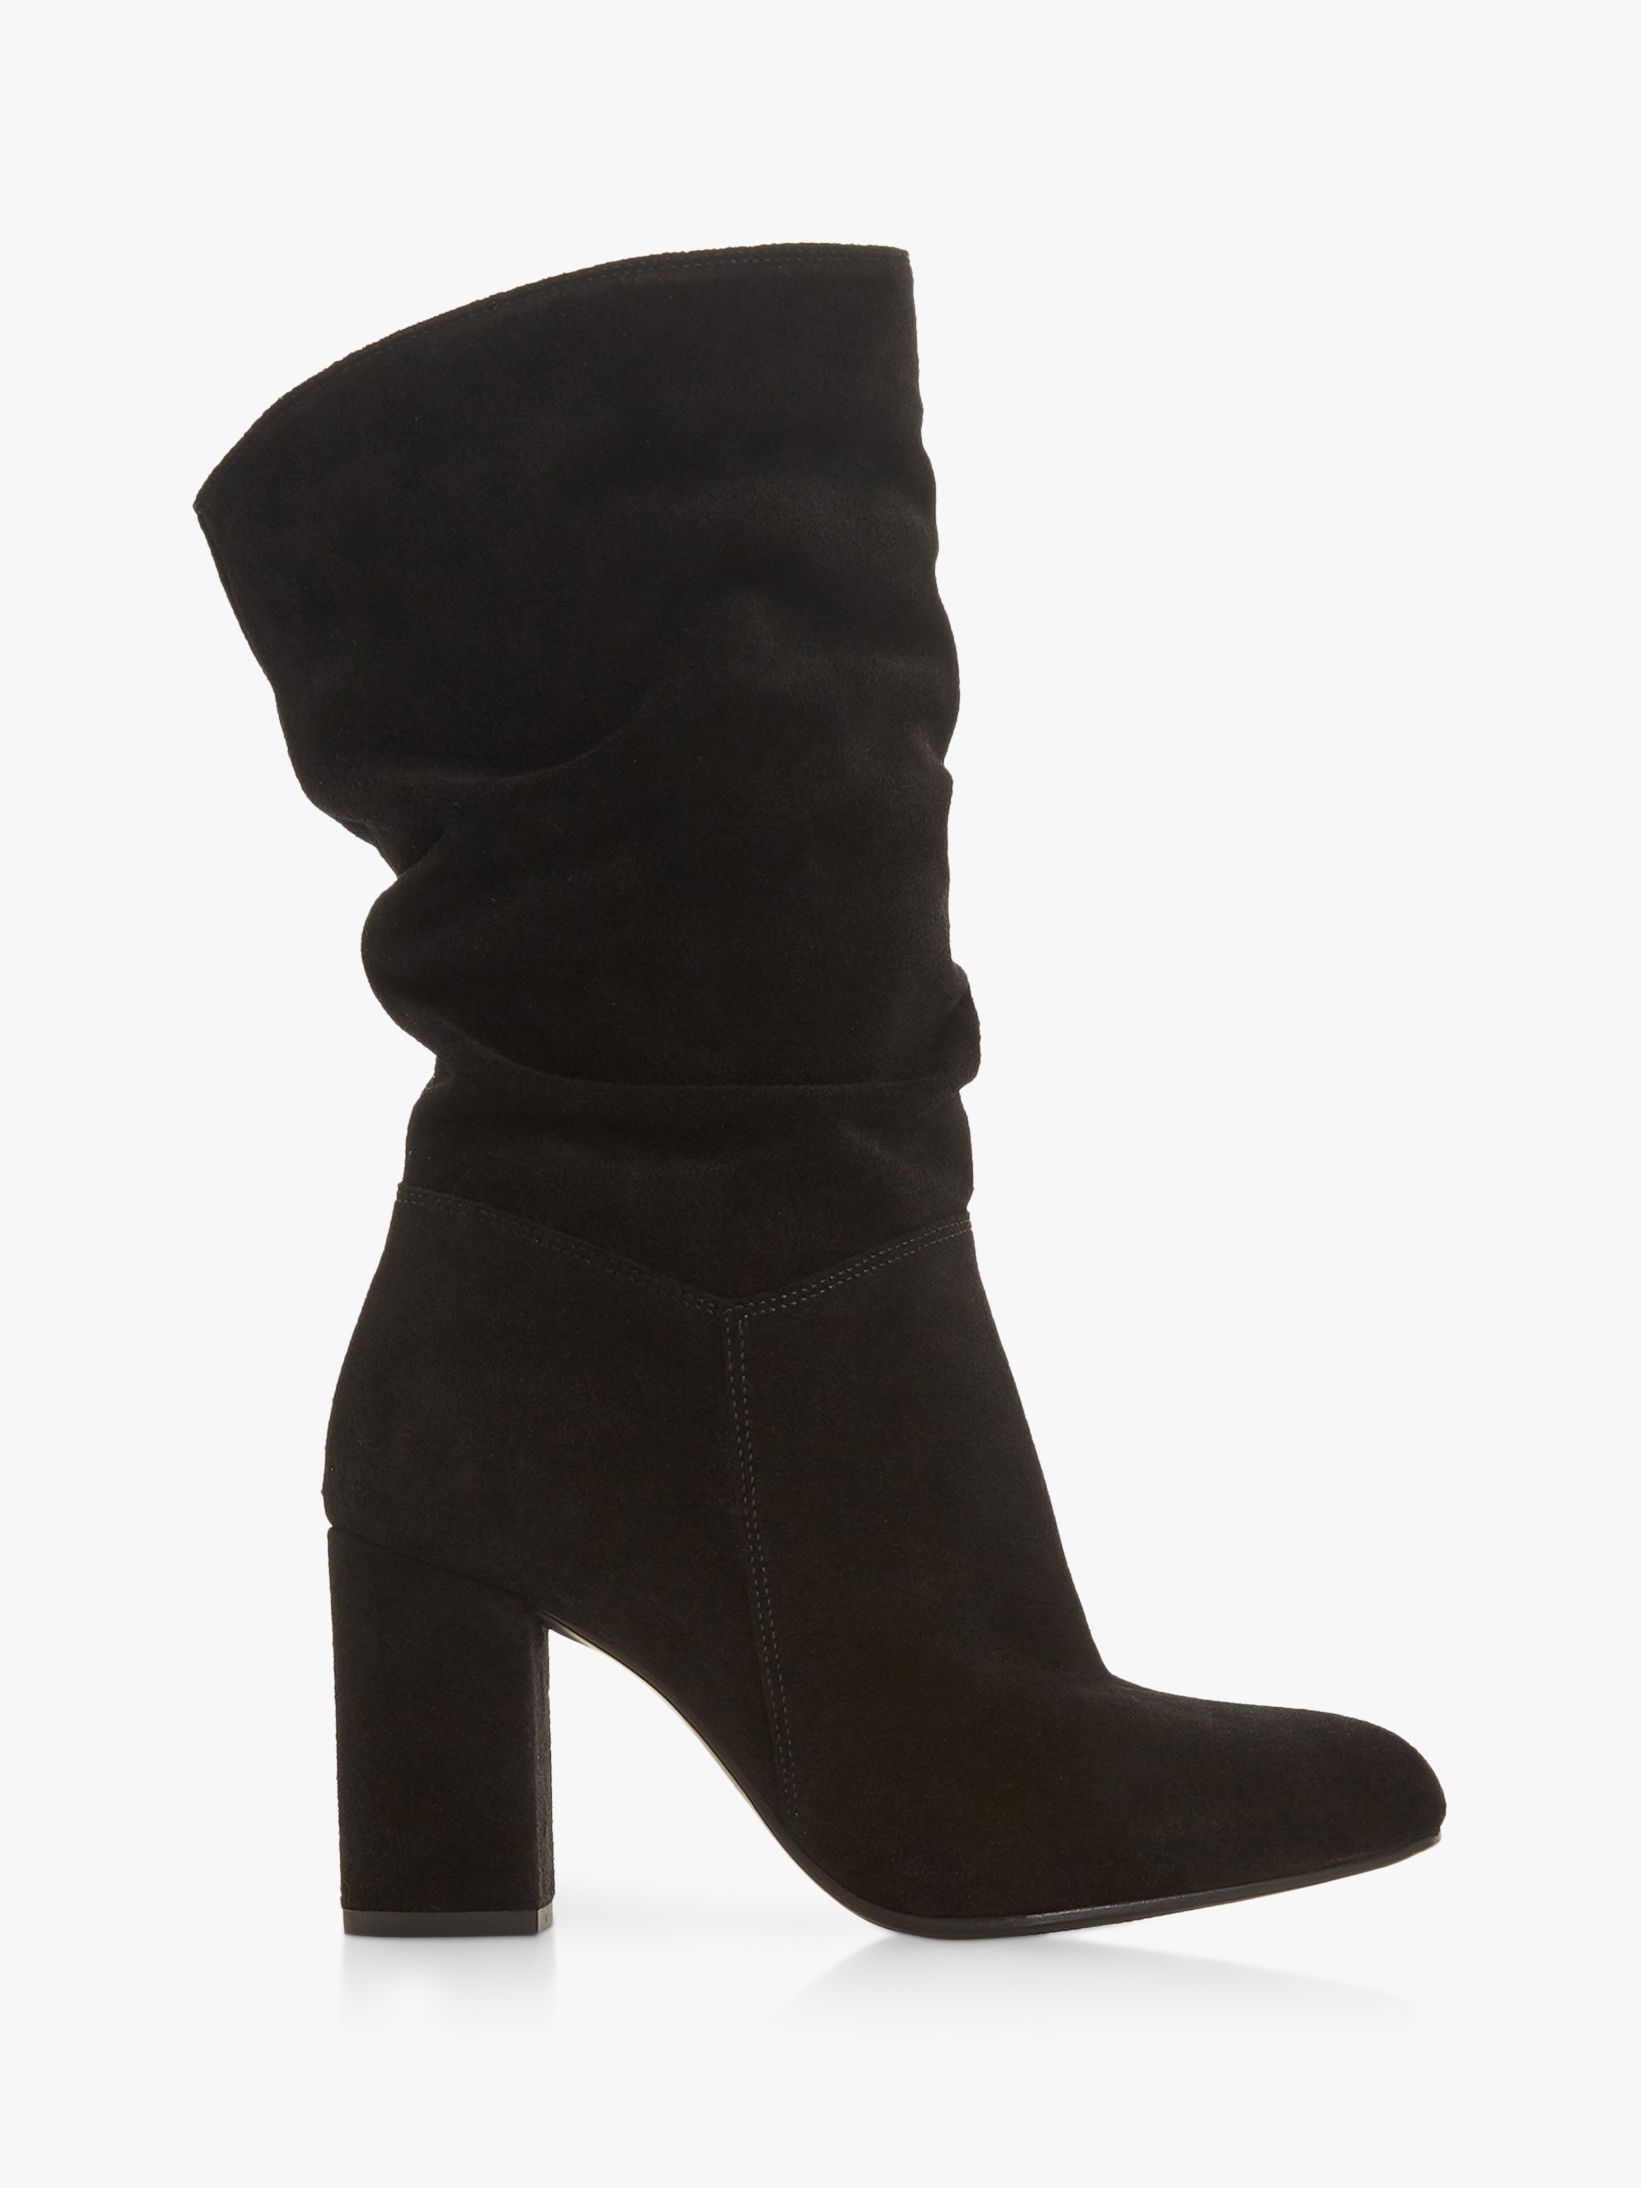 Dune Rafaellie Ruched Block Heel Boots Black Suede At John Lewis And Partners 